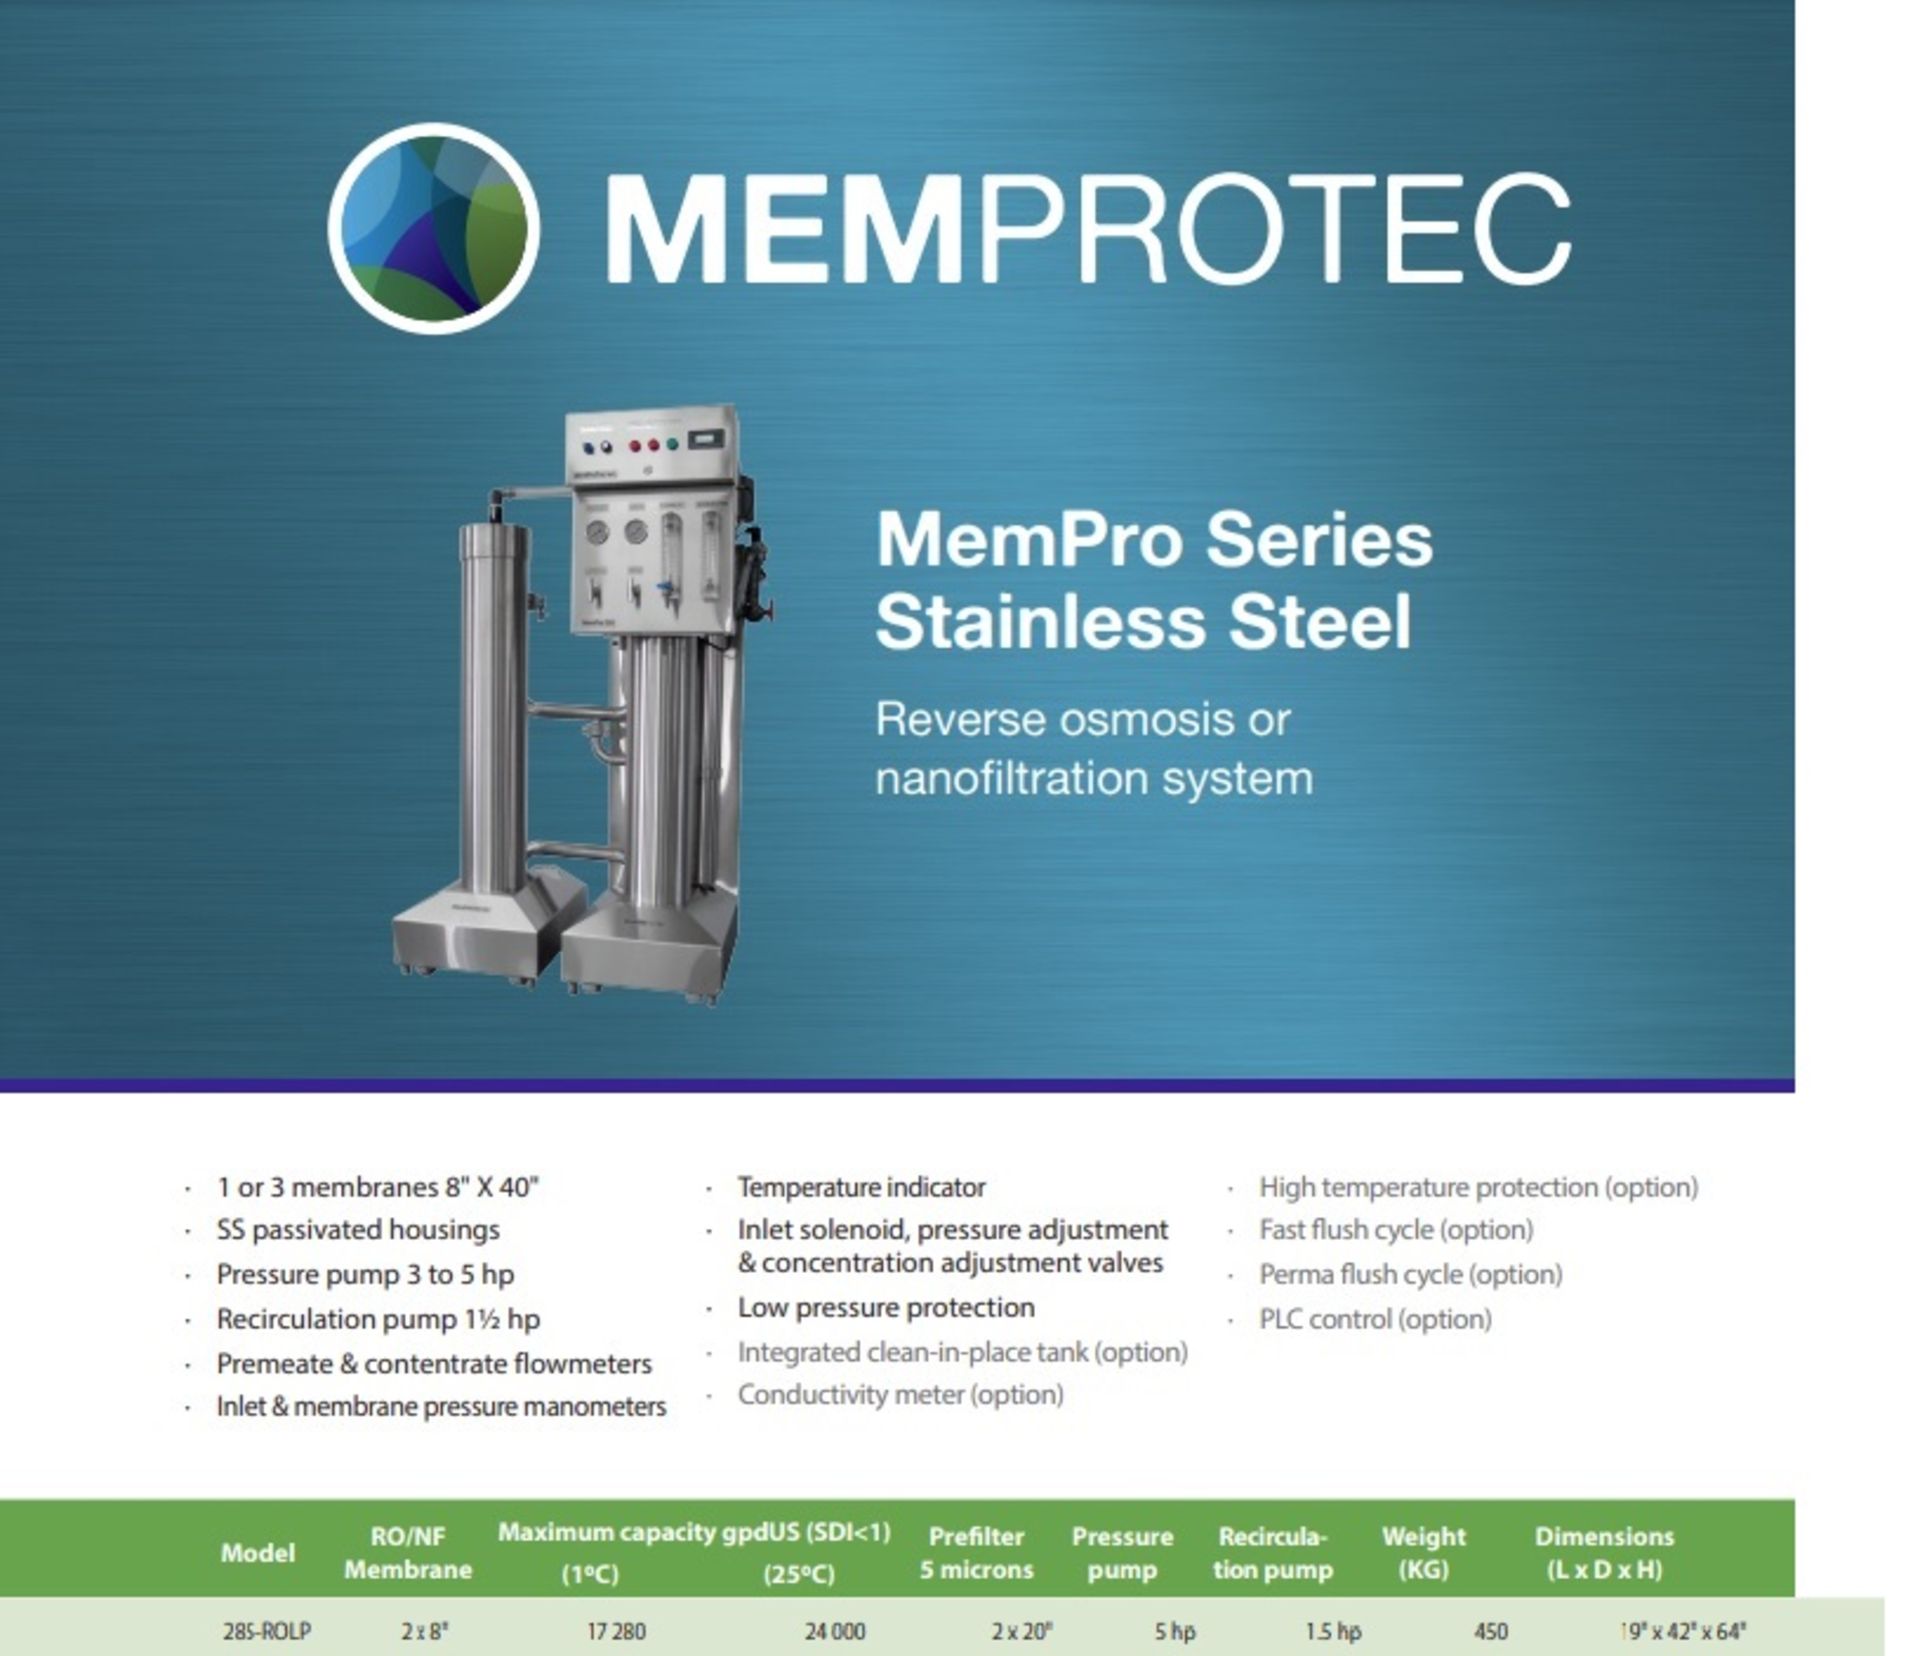 MemPro Series Stainless Steel Reverse osmosis or nanofiltration system Model:285-ROLP - Image 3 of 13